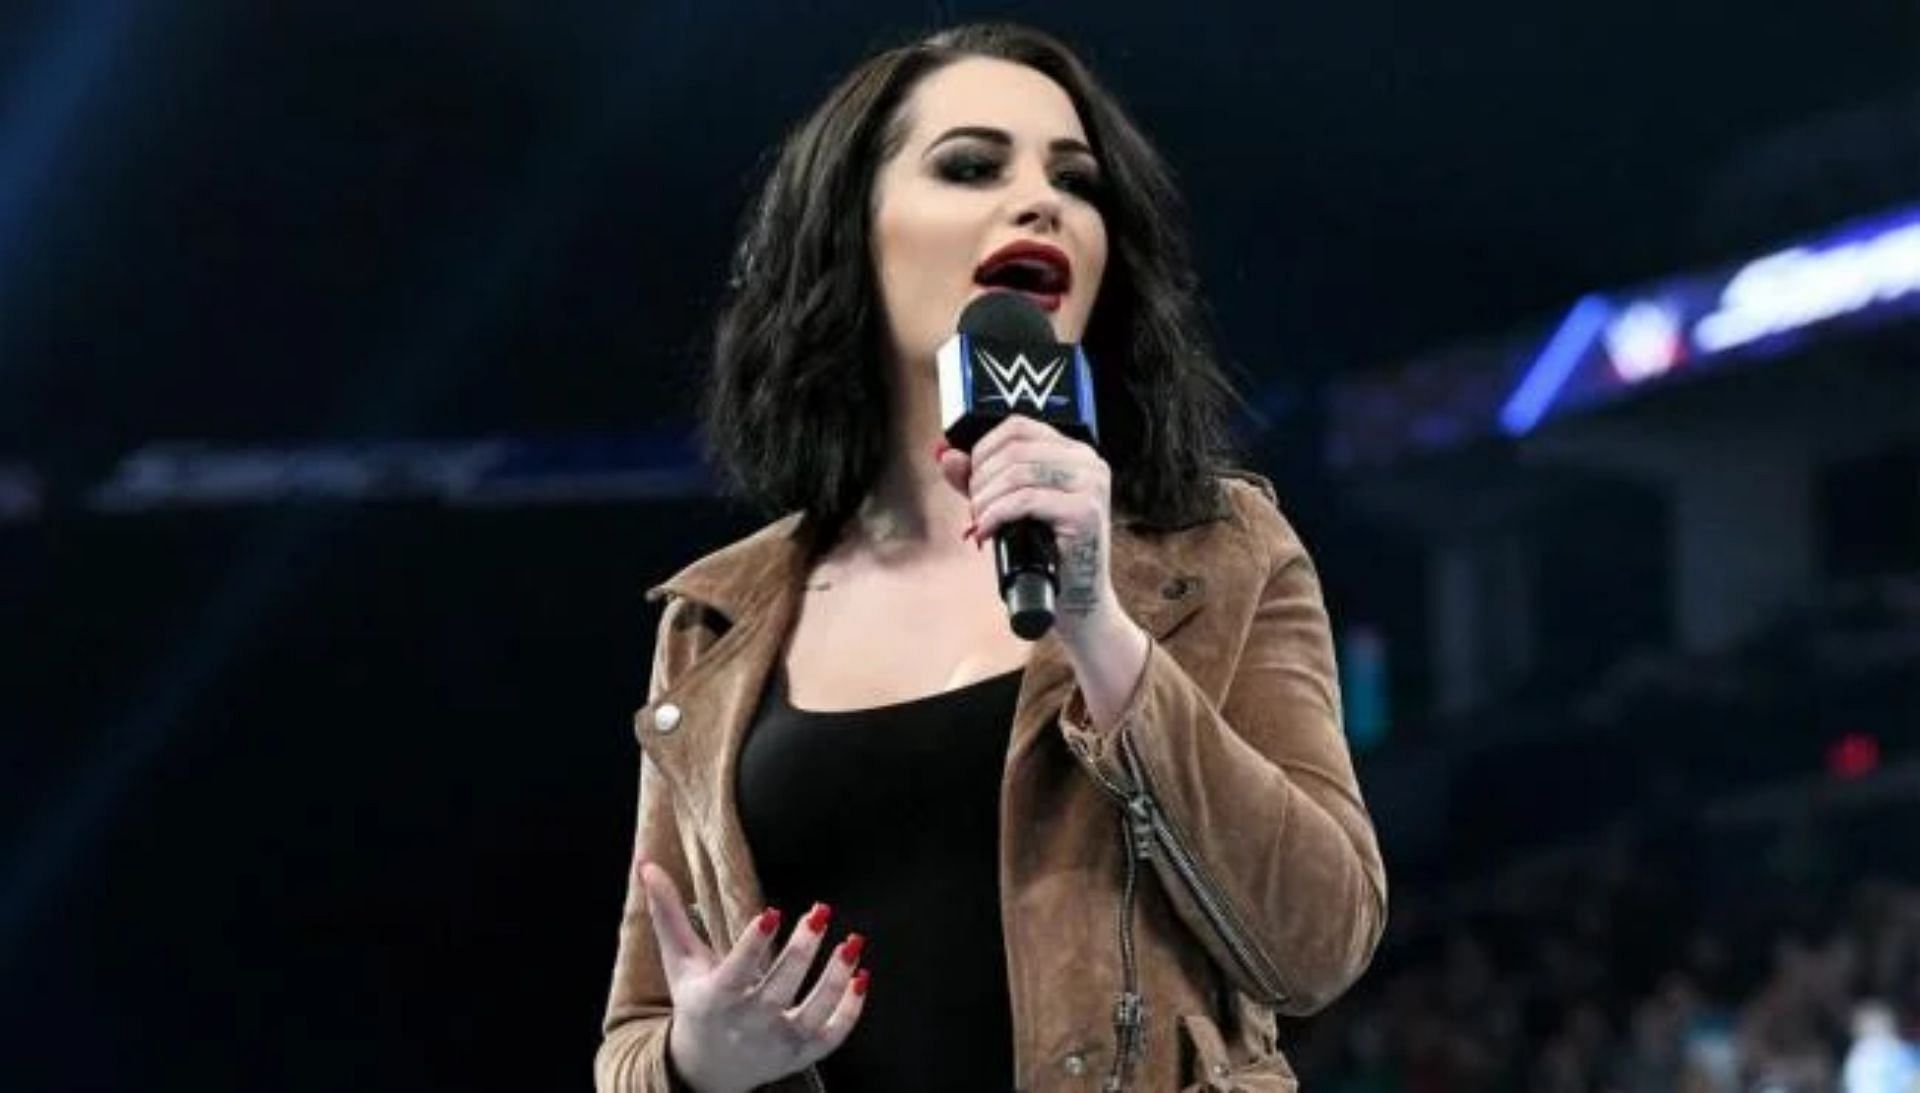 The former Divas Champion is set to leave WWE next month.